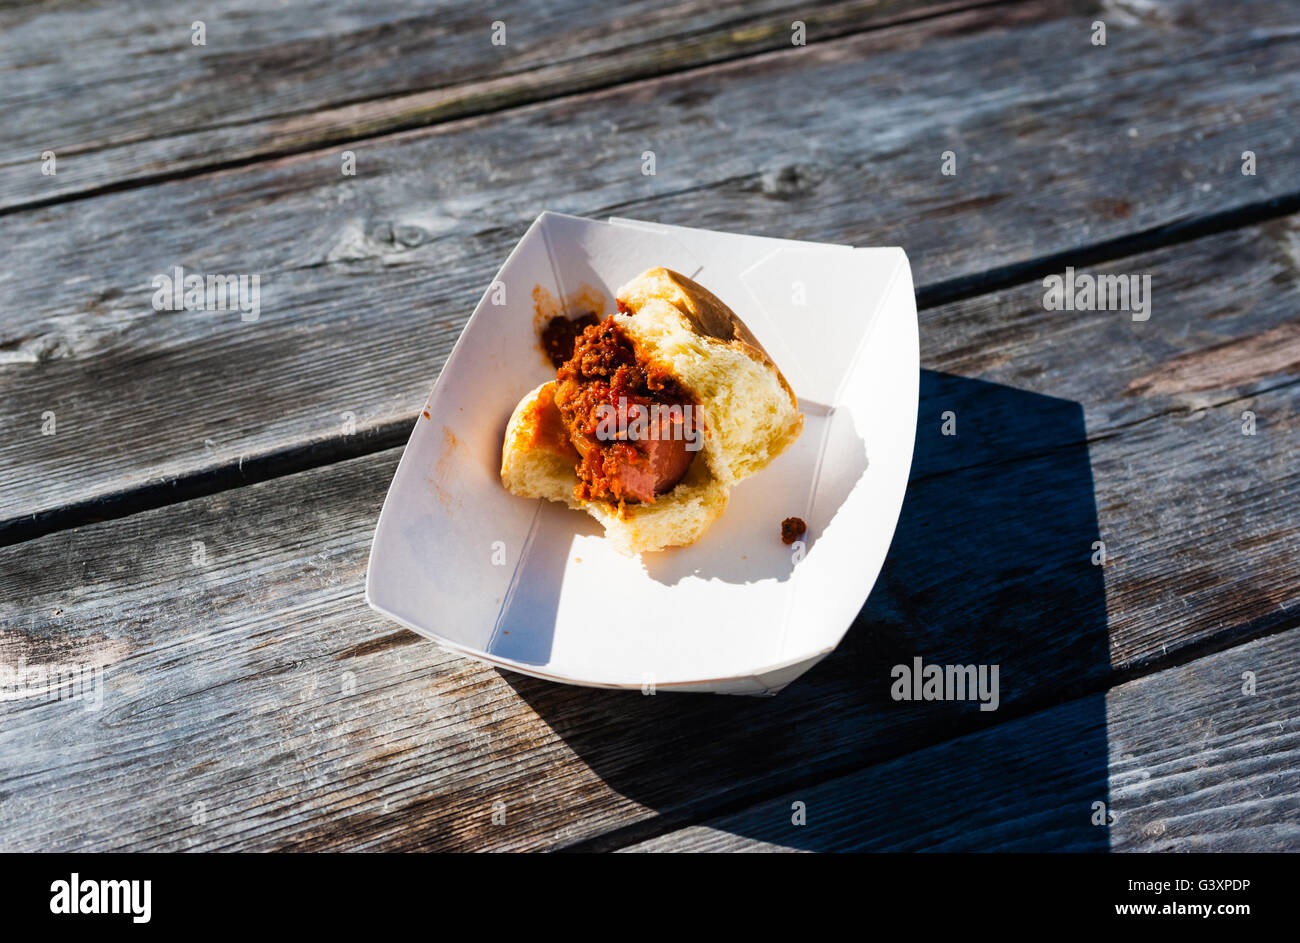 Remaining piece of eaten sausage and chili on a bun in a paper tray, on weathered gray picnic table. Stock Photo